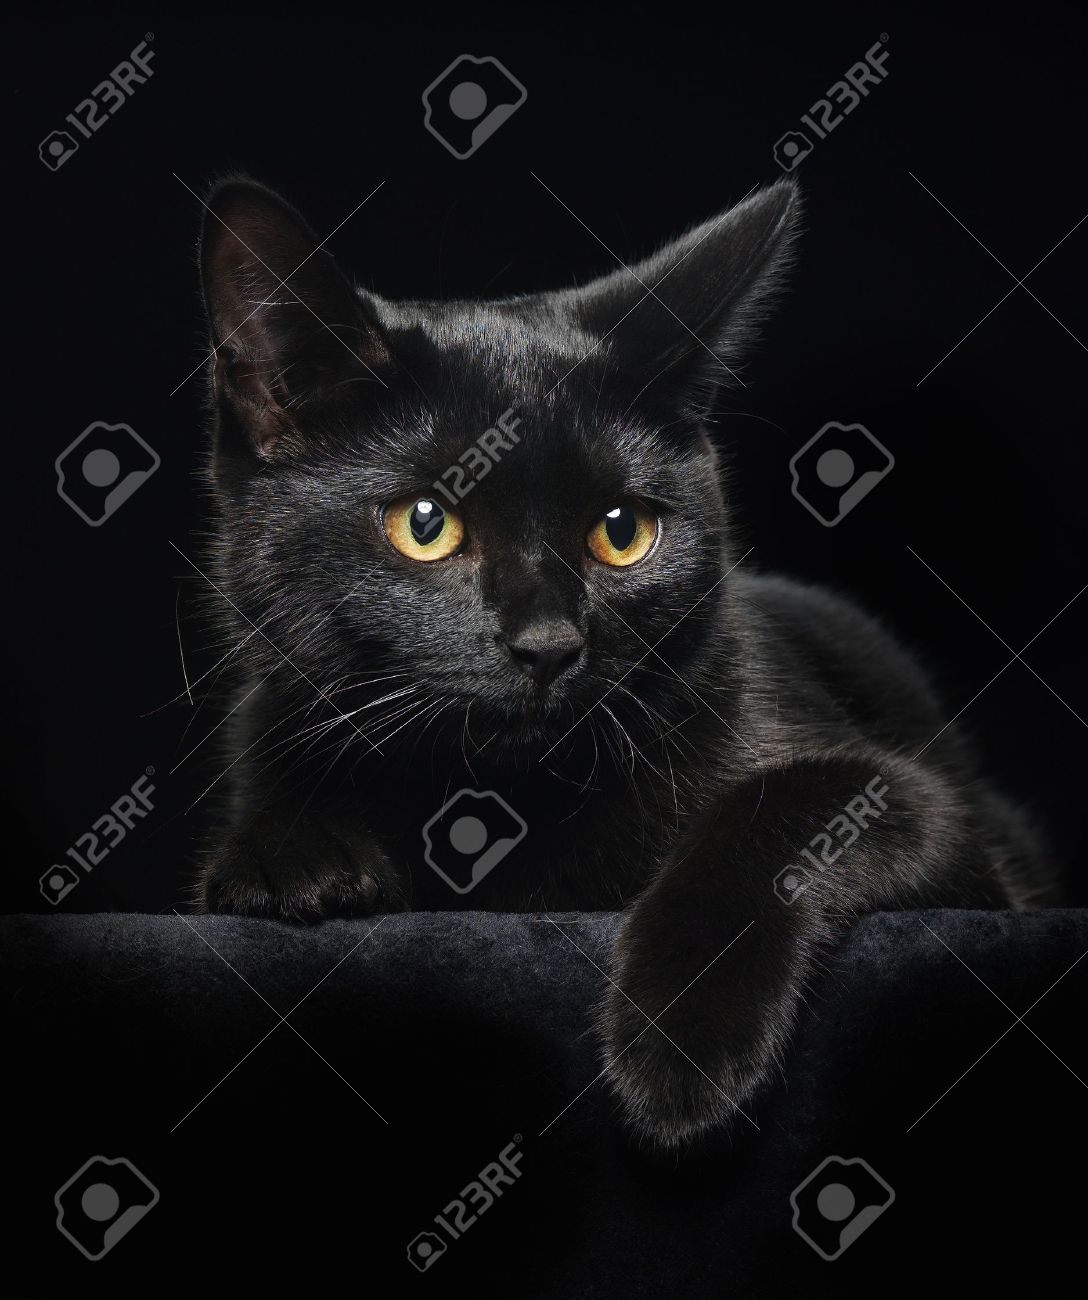 Black Cat With Yellow Eyes On Background Stock Photo